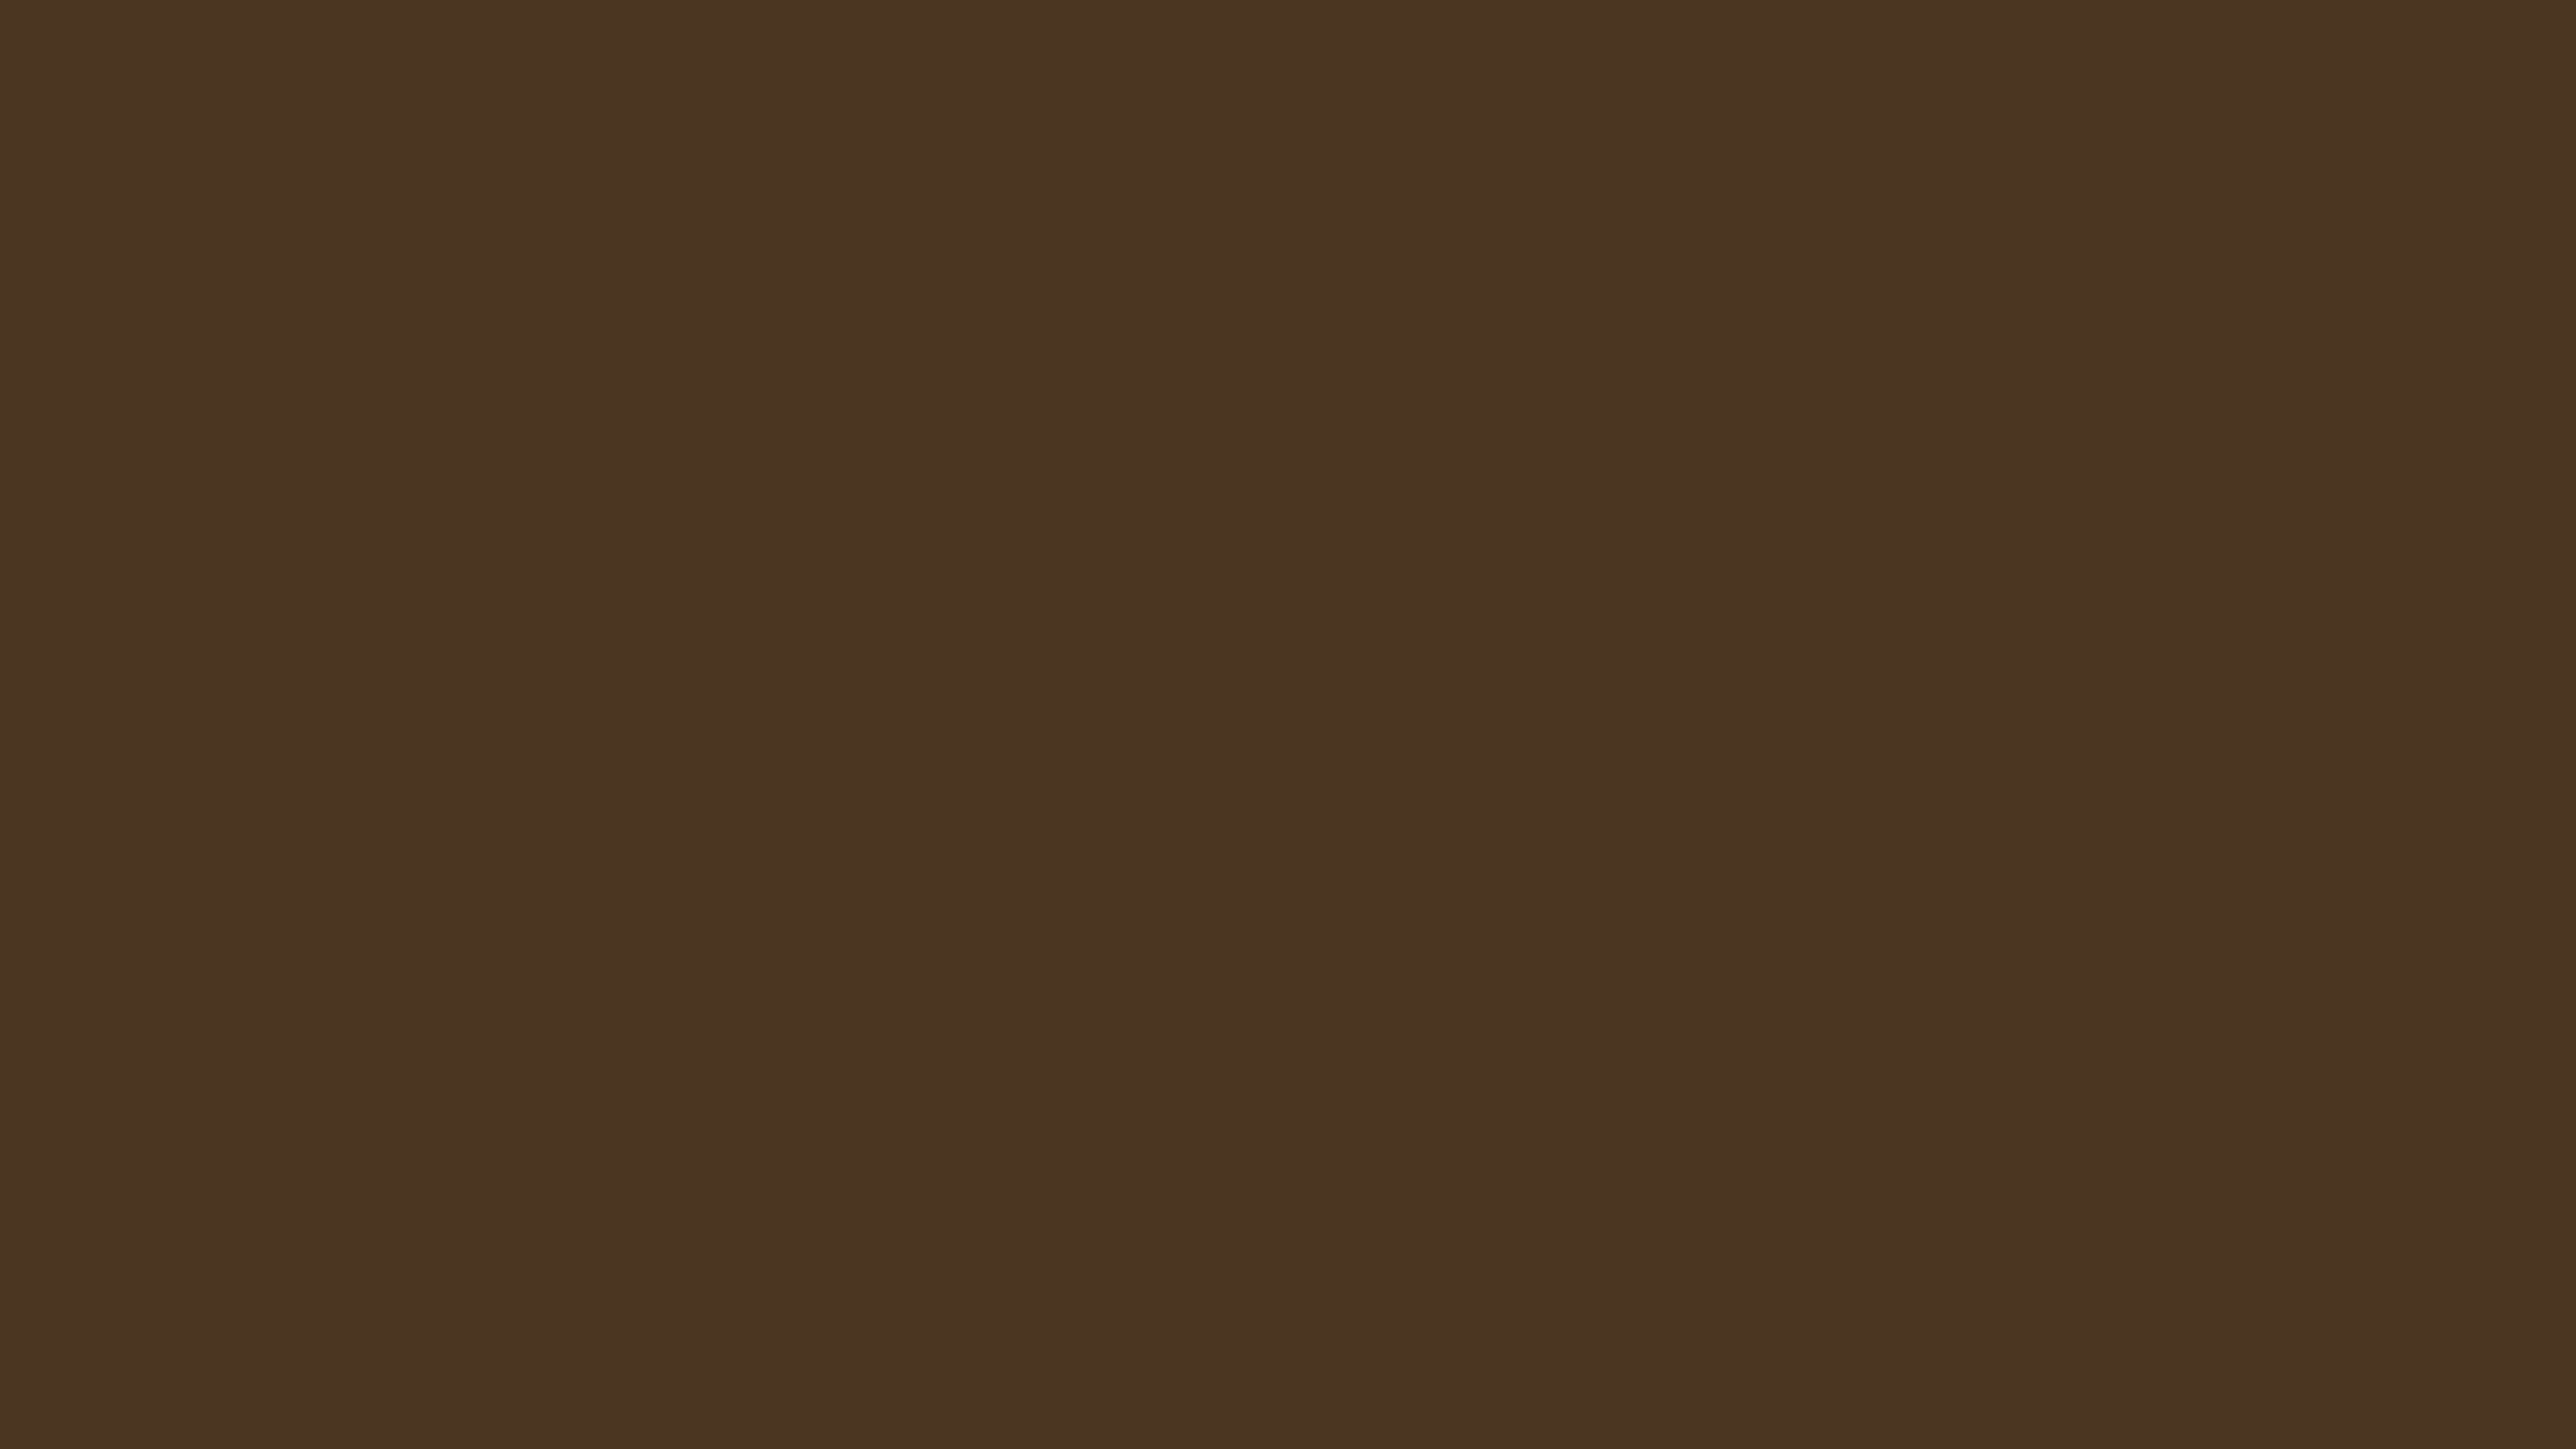 solid tan background  Color wallpaper iphone Simple iphone wallpaper  Iphone wallpaper app